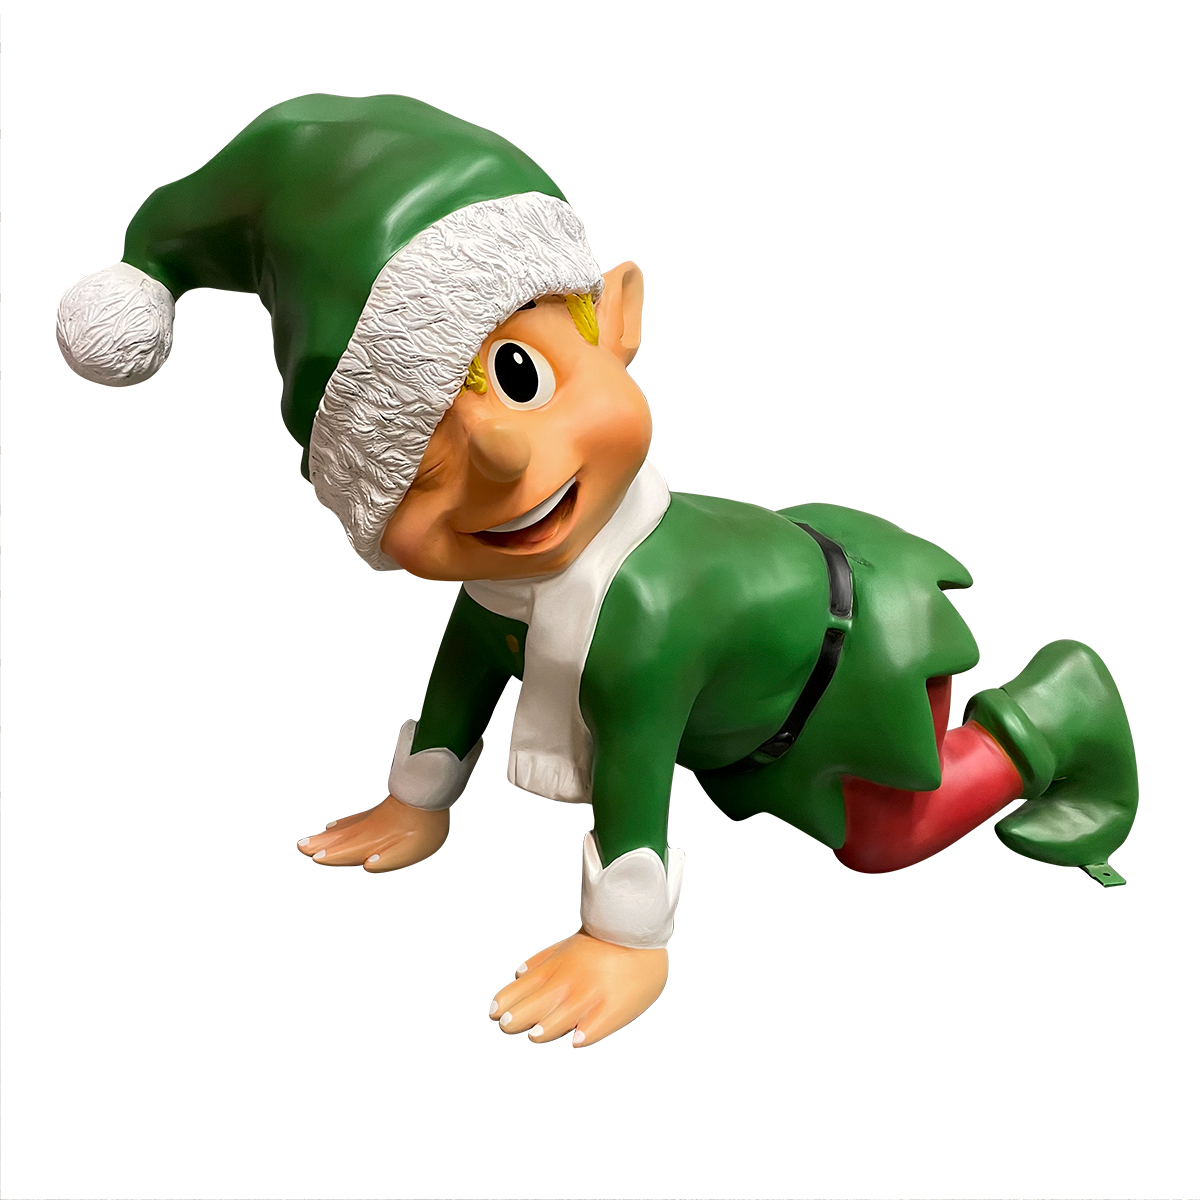 Jangles the Elf - Crawling - 2.5ft Tall